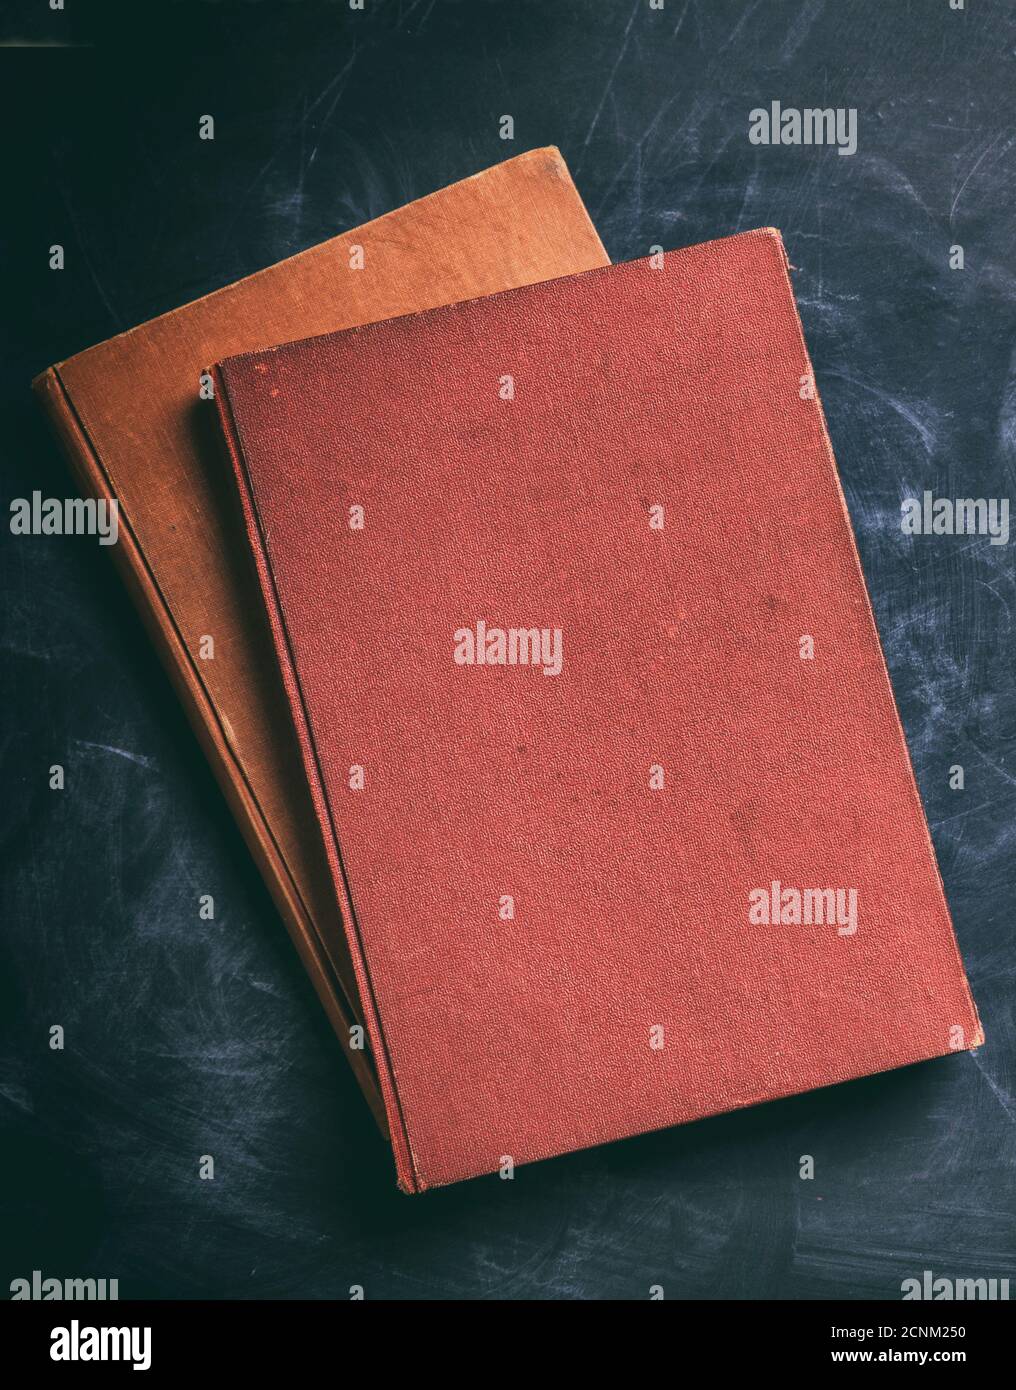 Blank books on black board background. Old vintage cloth hard cover book, cover template, top view, vertical Stock Photo